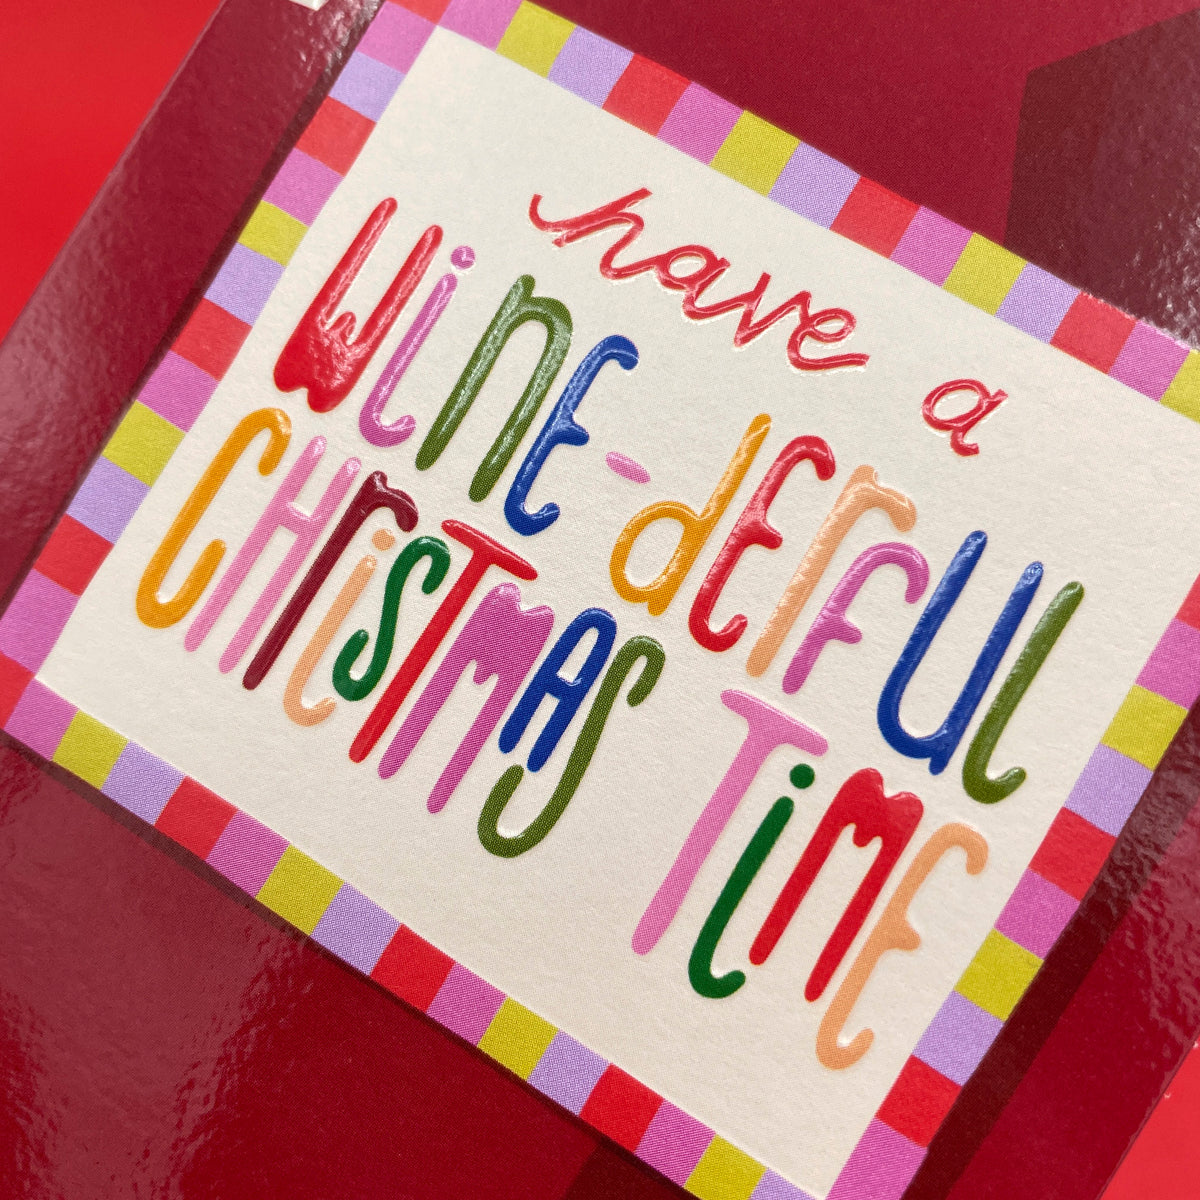 A close up on A christmas card in the shape of a red wine bottle featuring a label with the words &#39; have a wine-derful christmas time&#39;.